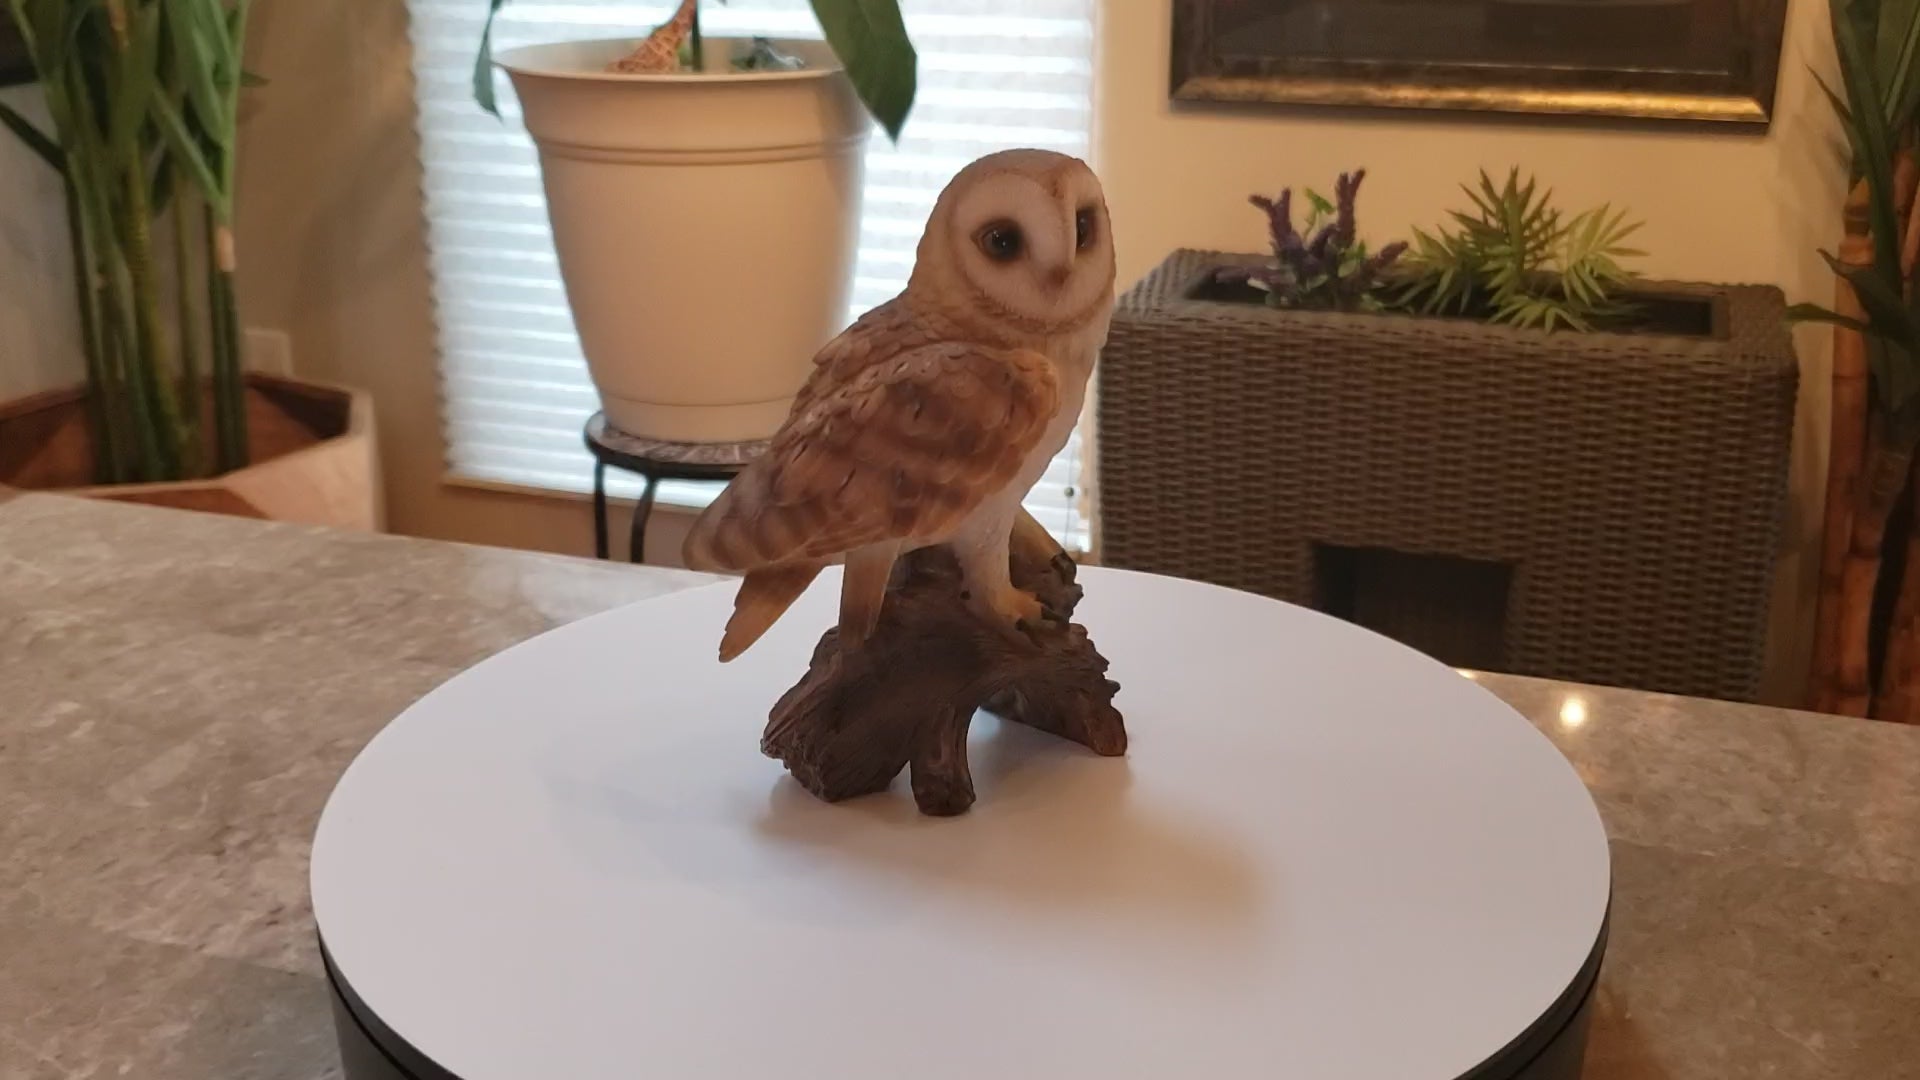 Auction for sale barn owl statue